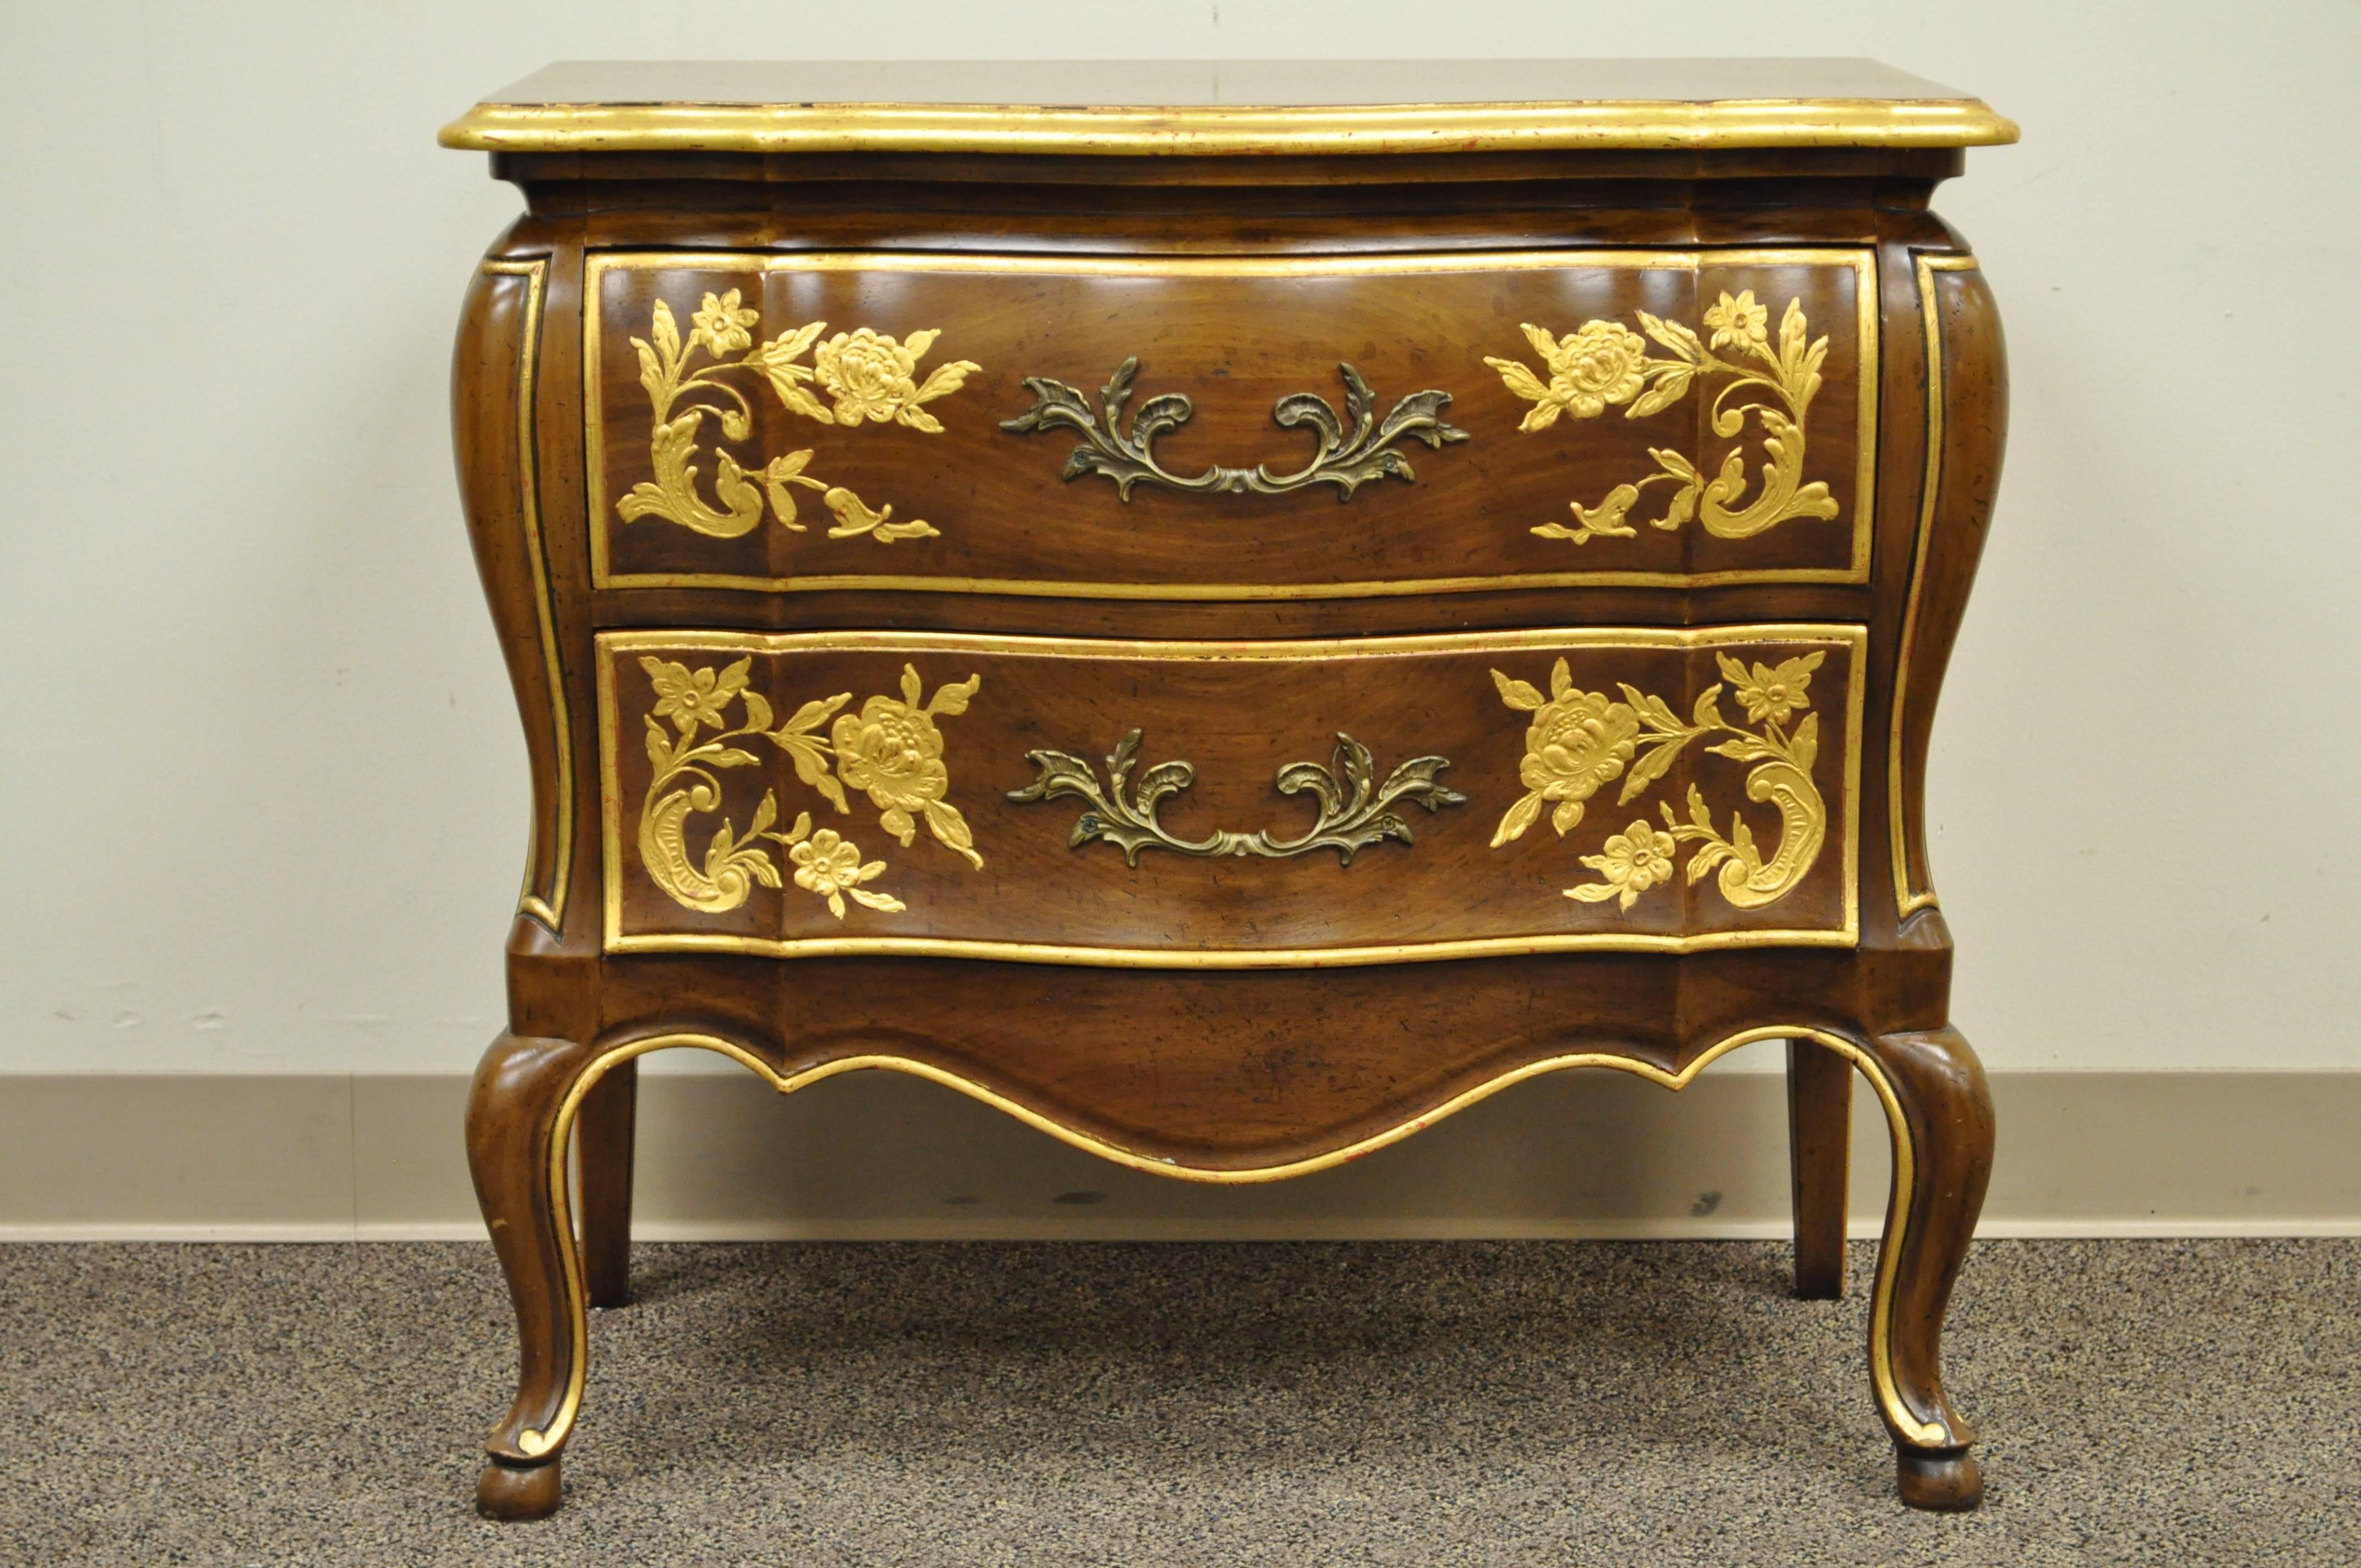 Fabulous two-drawer vintage bombe form commode by John Widdicomb. Chest features two very thick solid cherry wood dovetailed drawers, hand-painted gold gilt chinoiserie designed accents, elegant French Louis XV form, and clean shapely lines.